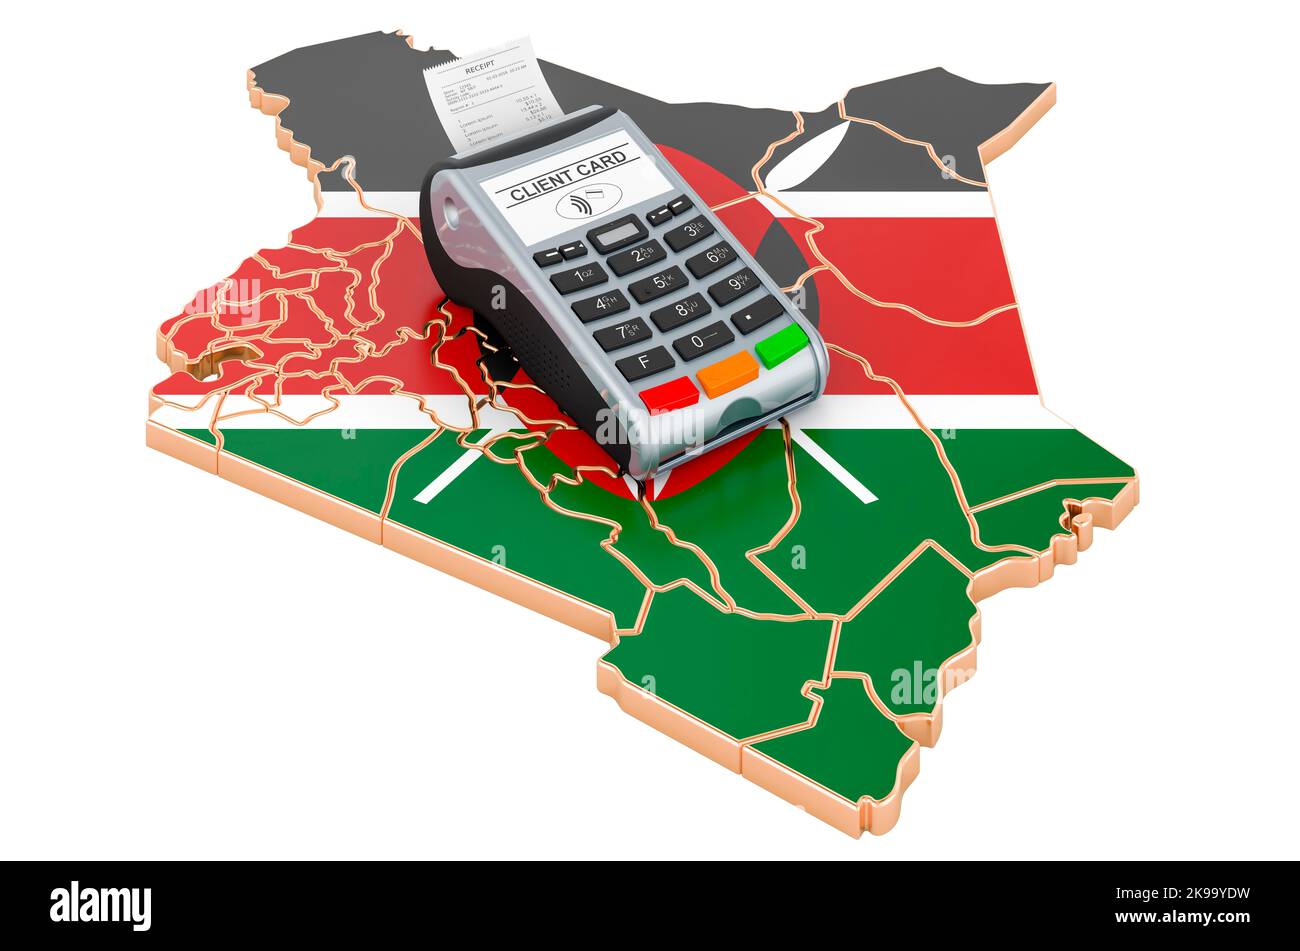 Kenyan map with POS terminal. Cashless payments in Kenya concept. 3D rendering isolated on white background Stock Photo